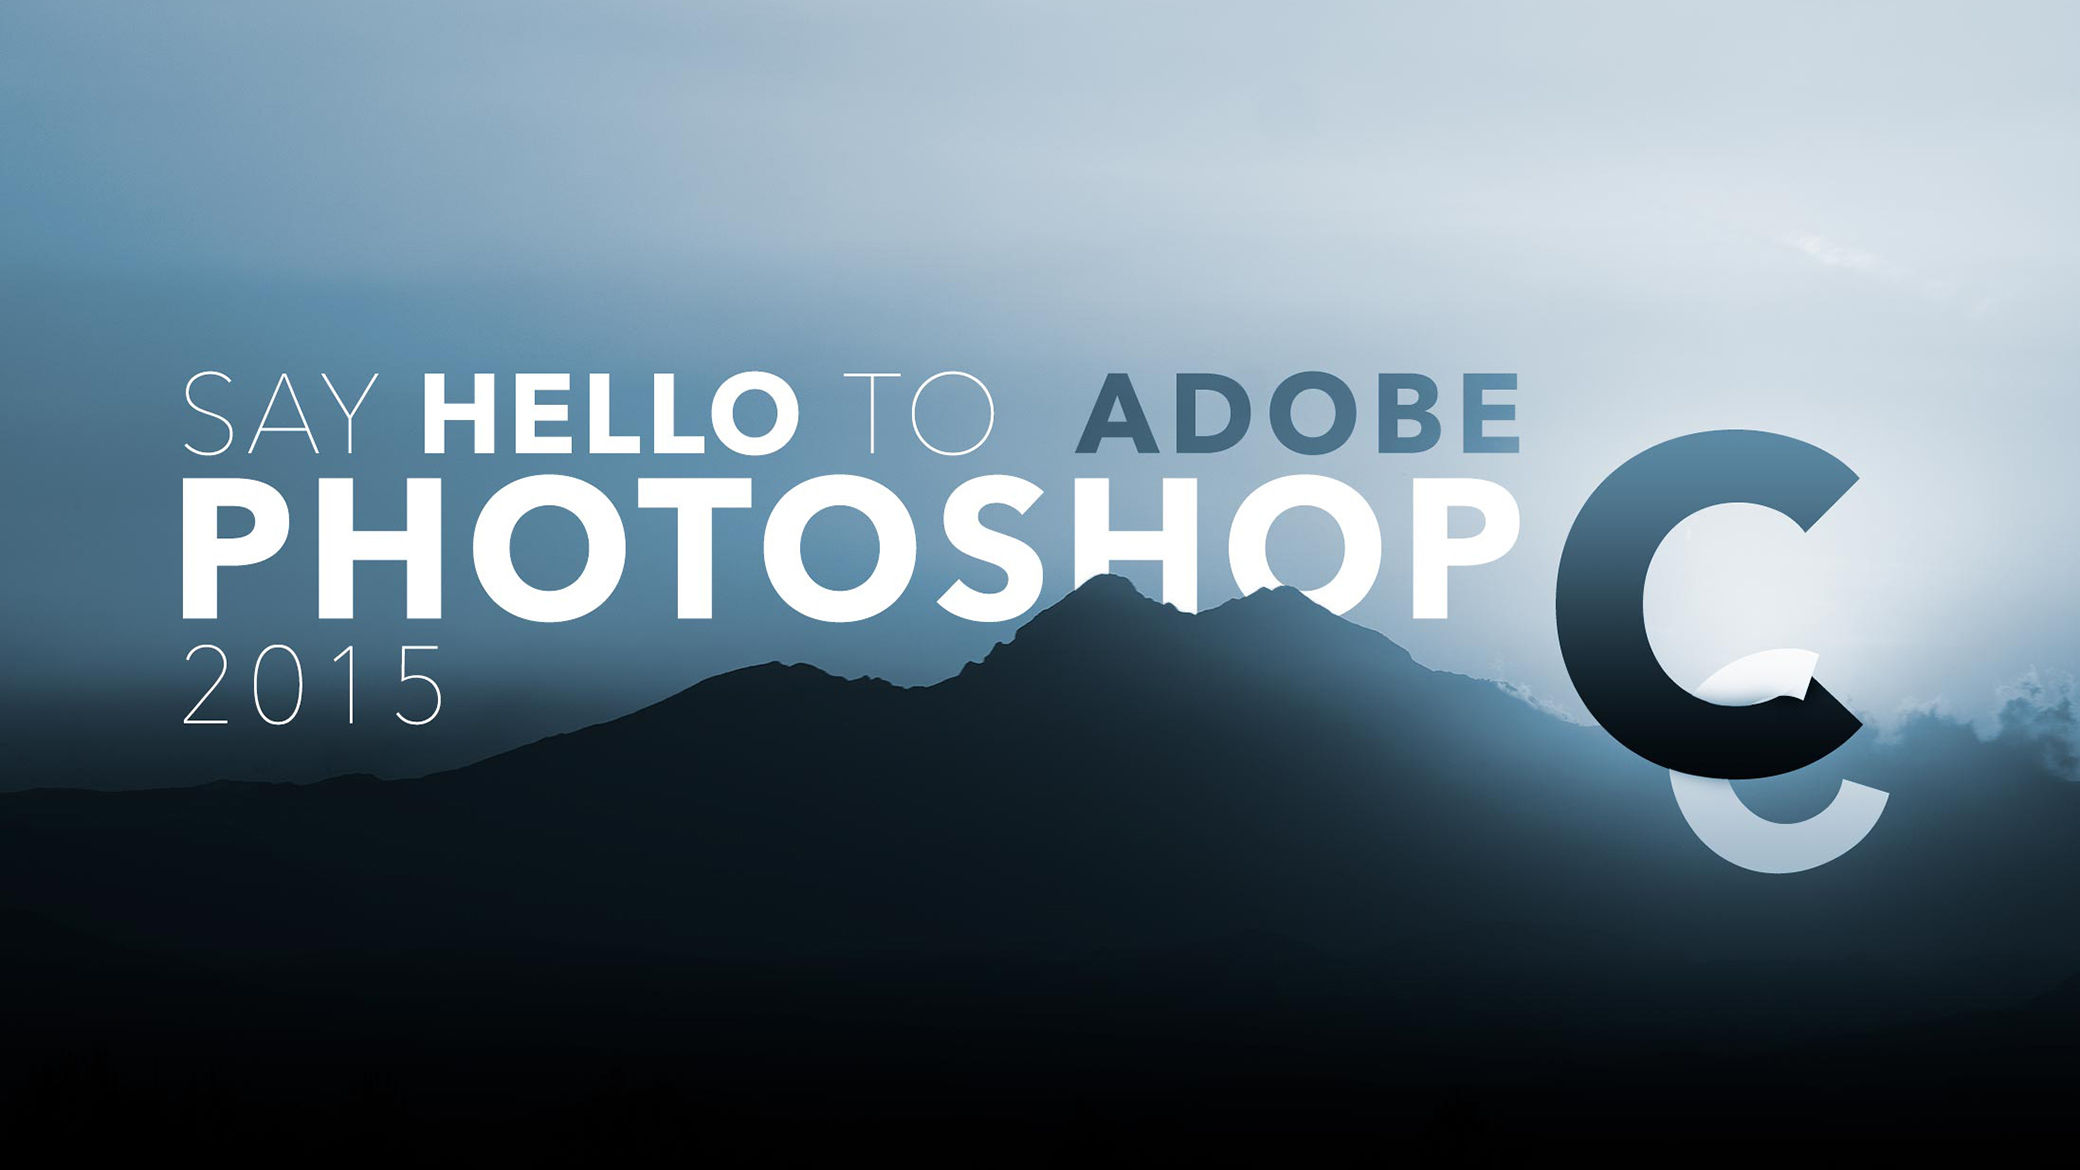 Top 5 features in Photoshop CC 2015